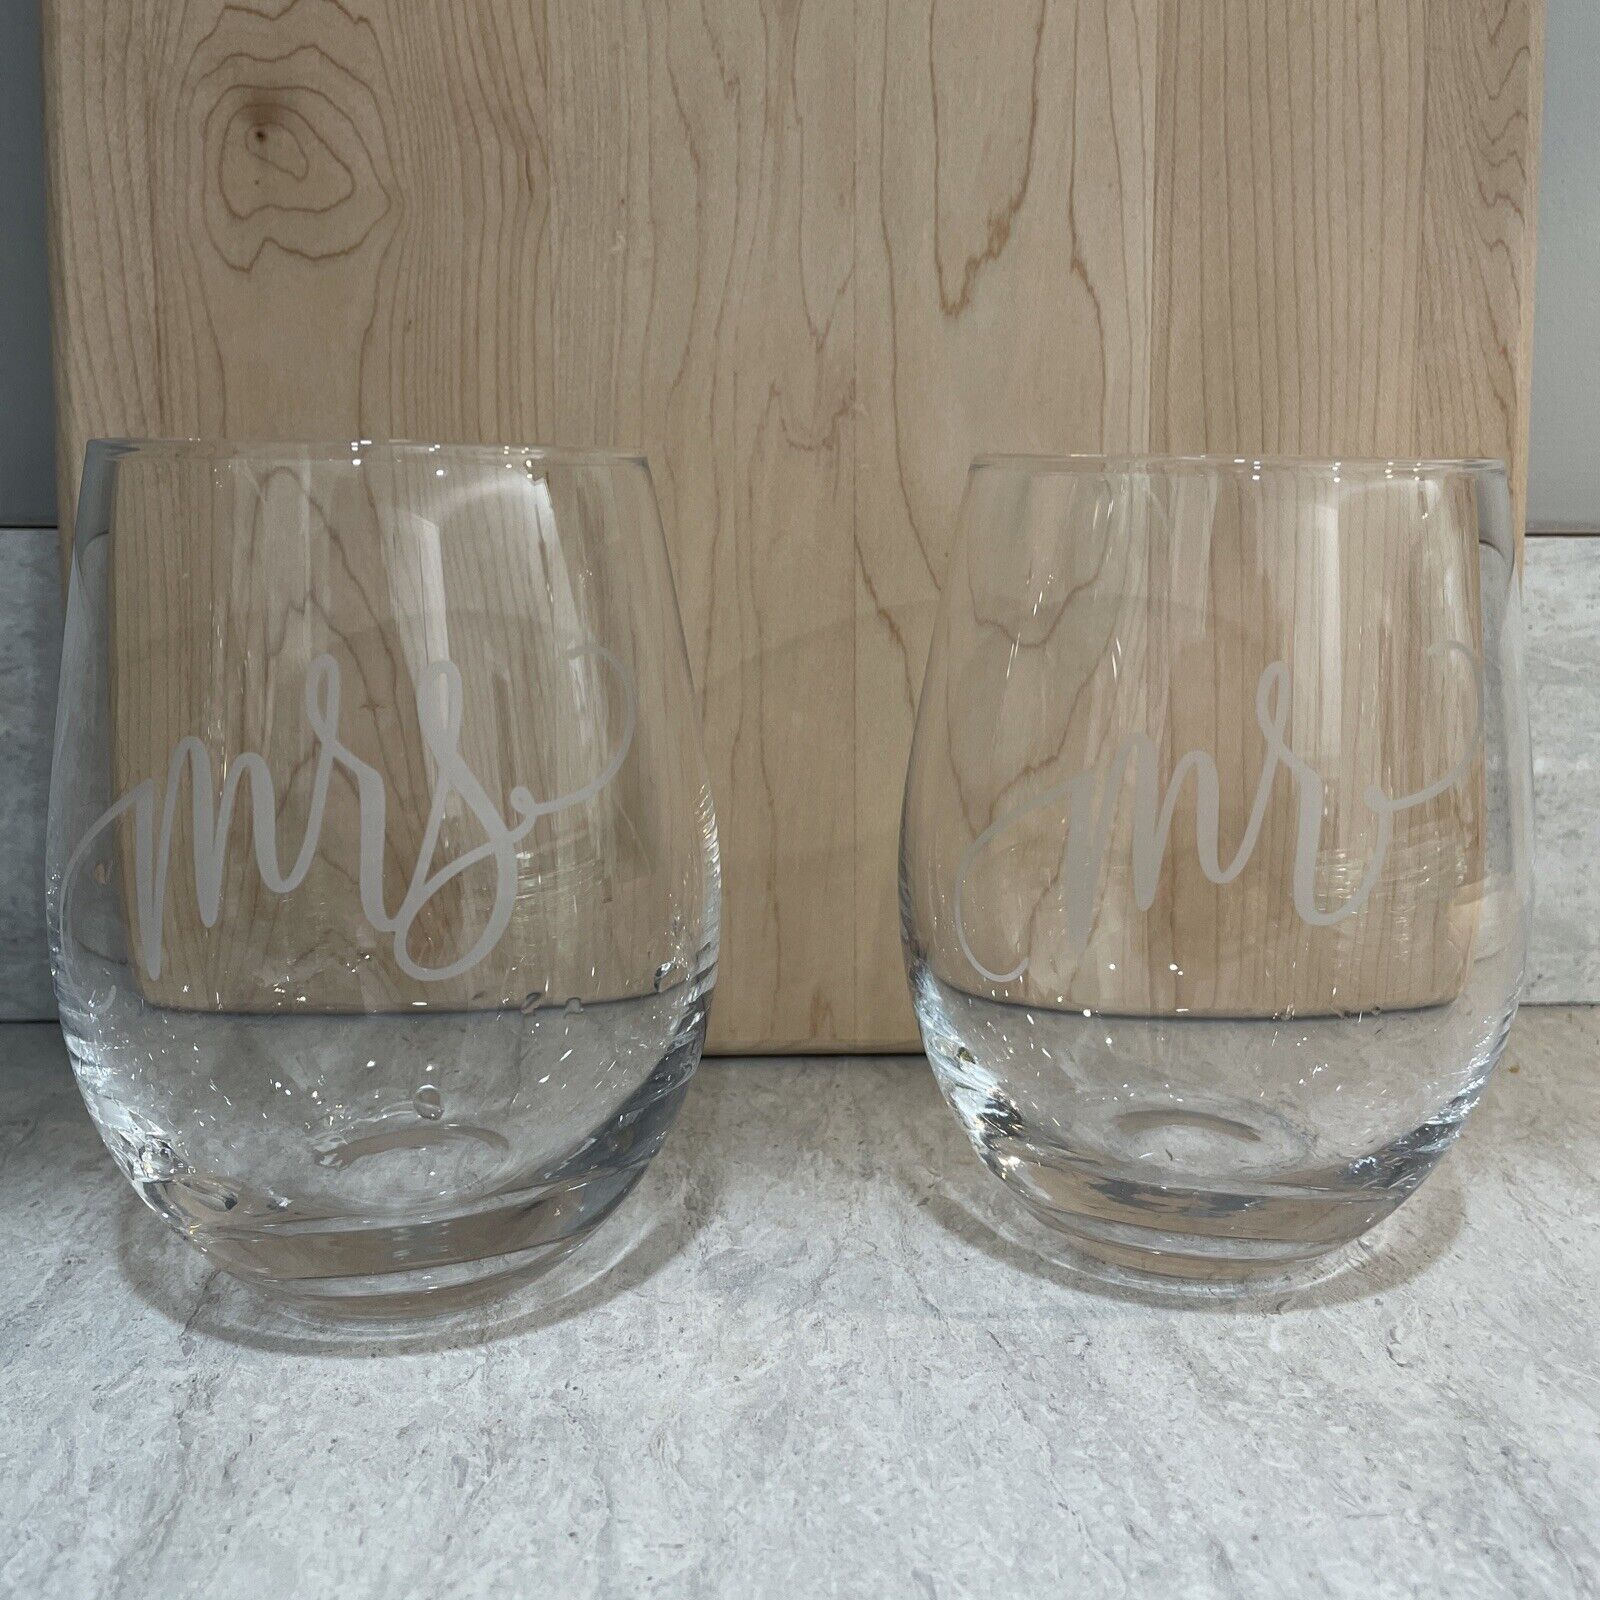 Mr. And Mrs. Cursive Etched Stemless Wine Glasses